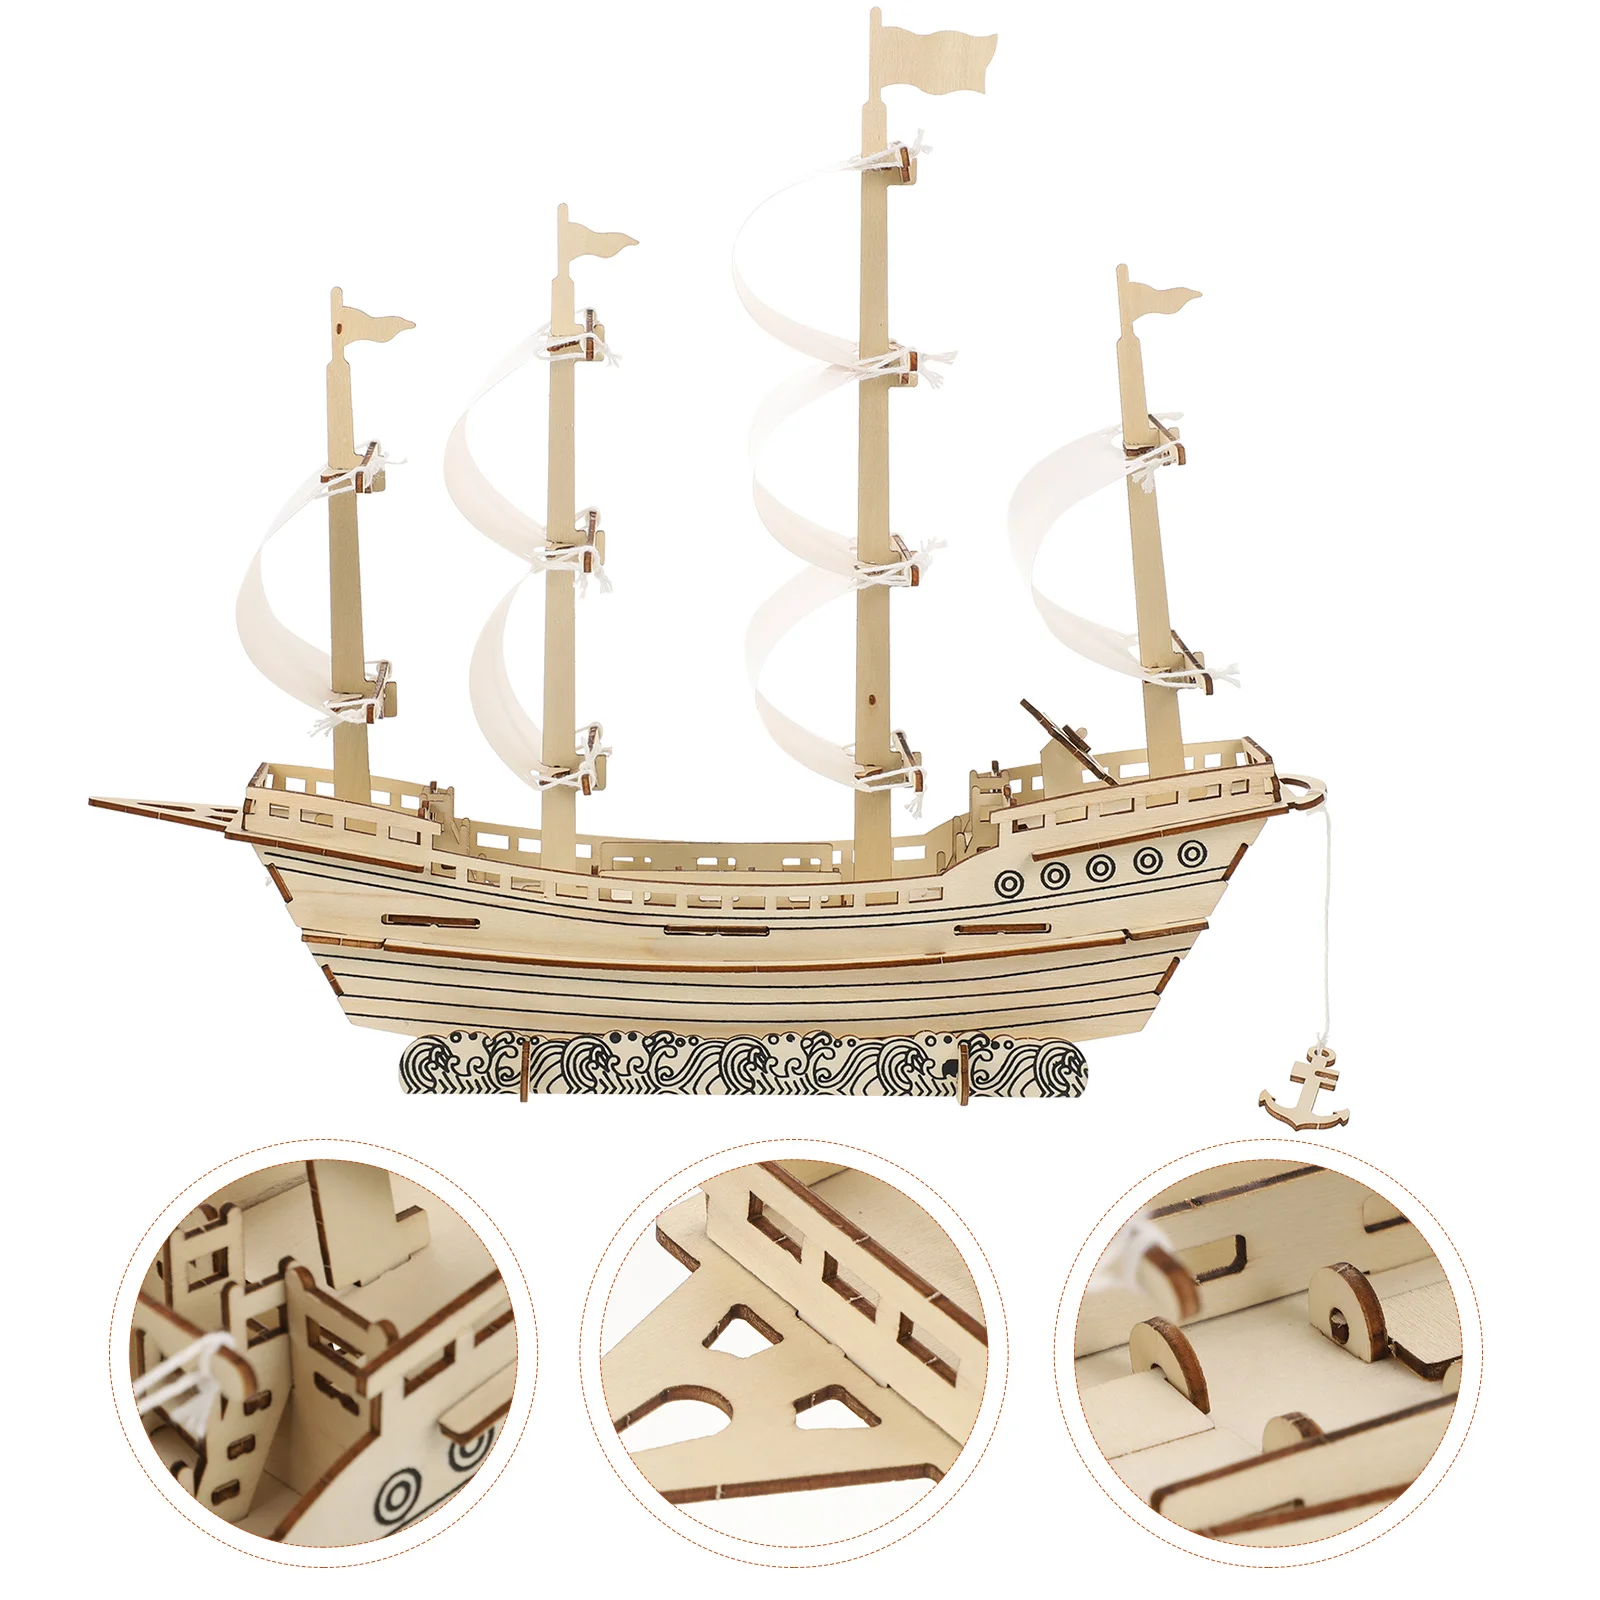 

Kids Wooden Puzzles 3D Sailing Jigsaw Sailboat Model Kit Lifelike Models Adults Build Suite Toy Toys Cool Child